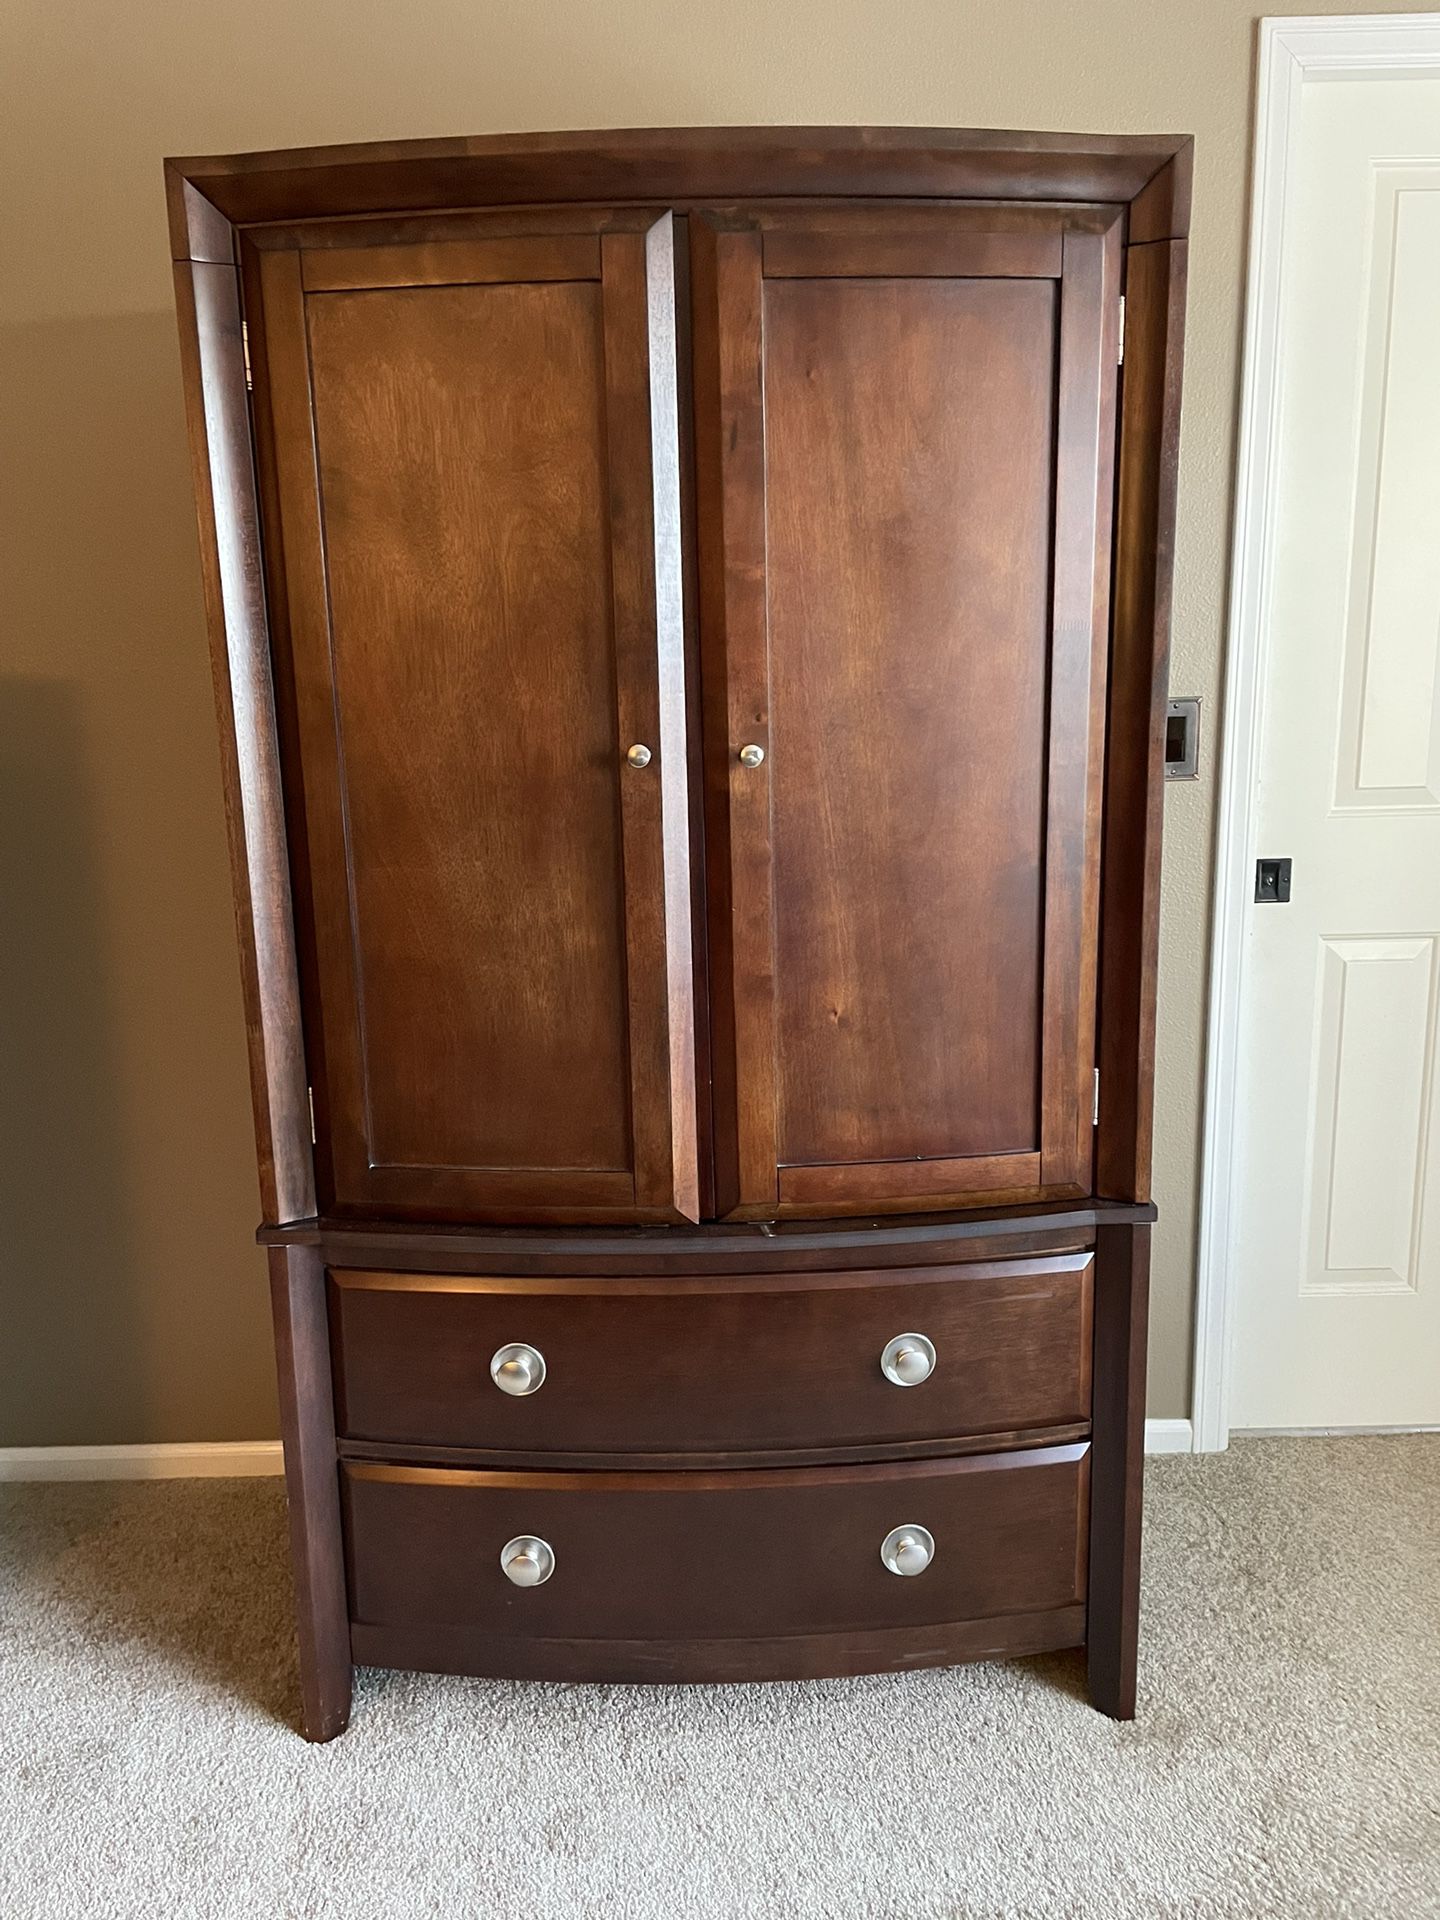 Armoire - Bedroom or Family Room